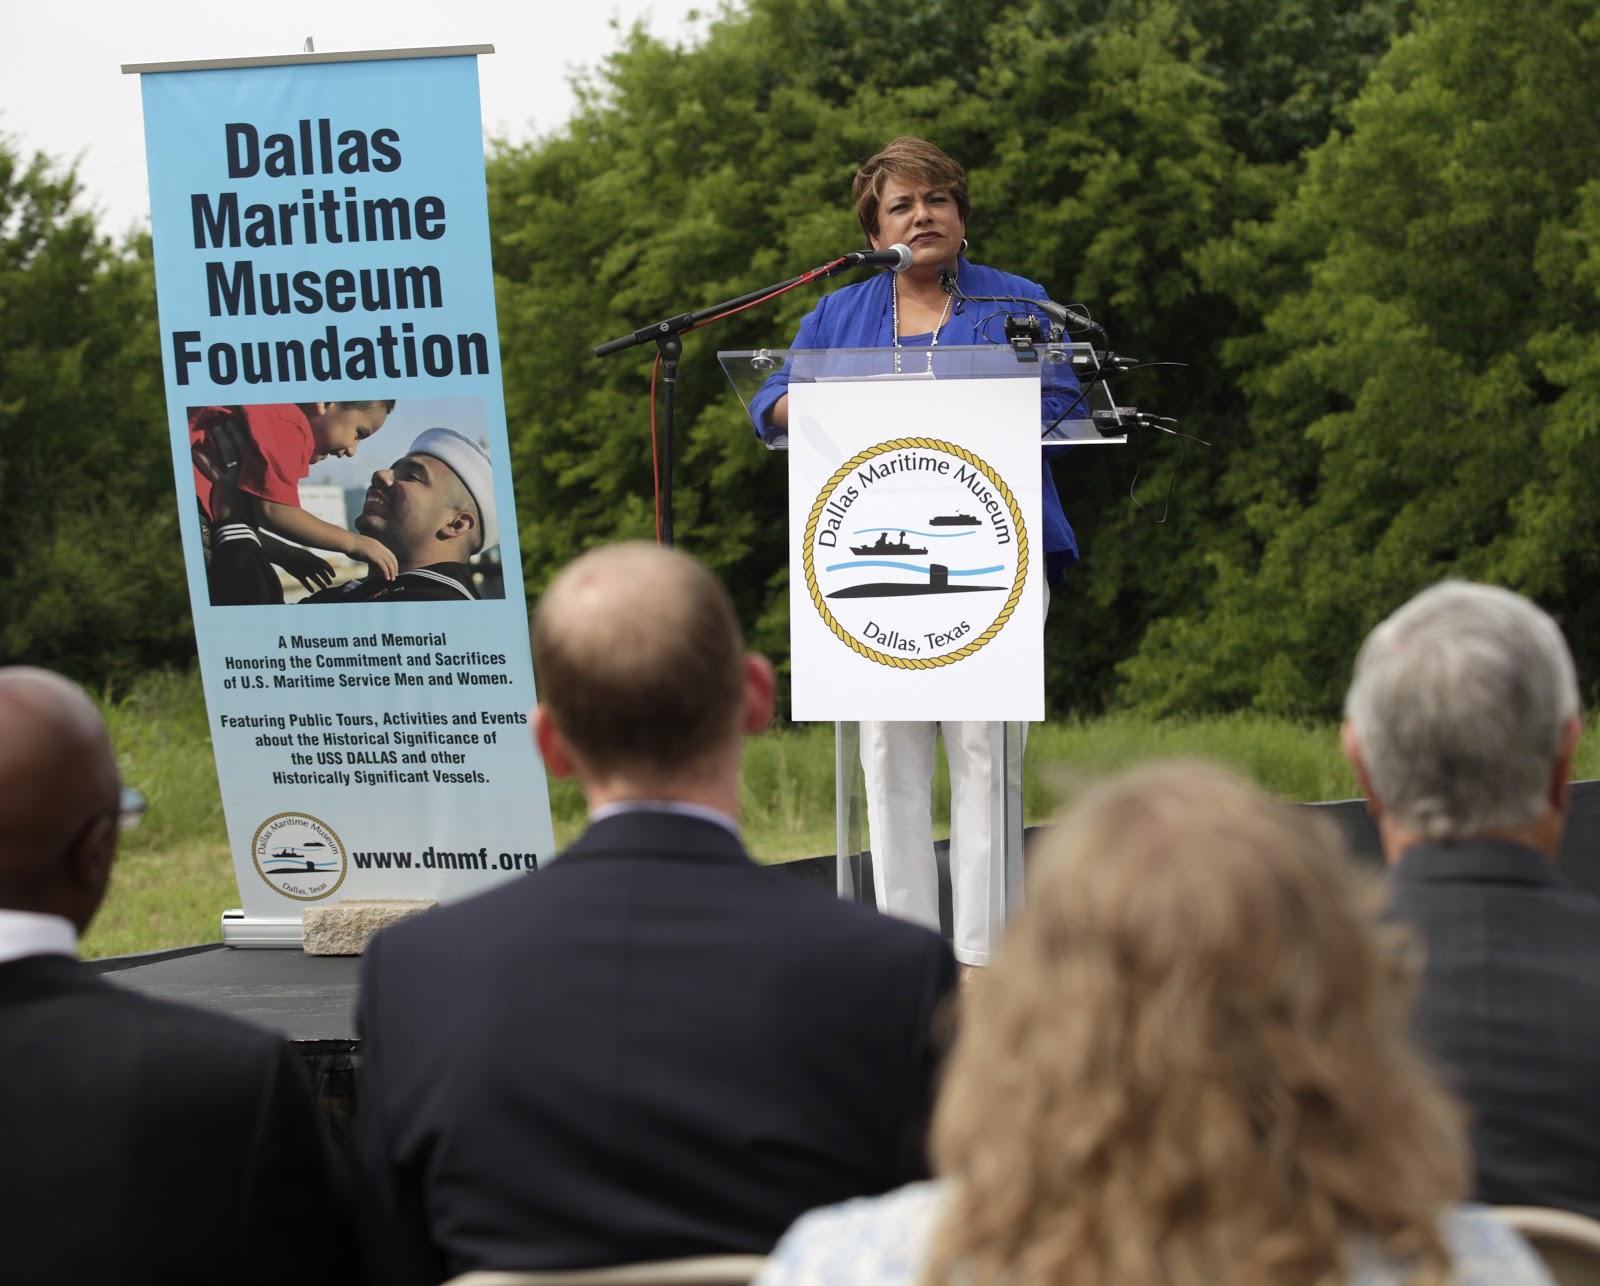 A Maritime Museum for Dallas is in the works